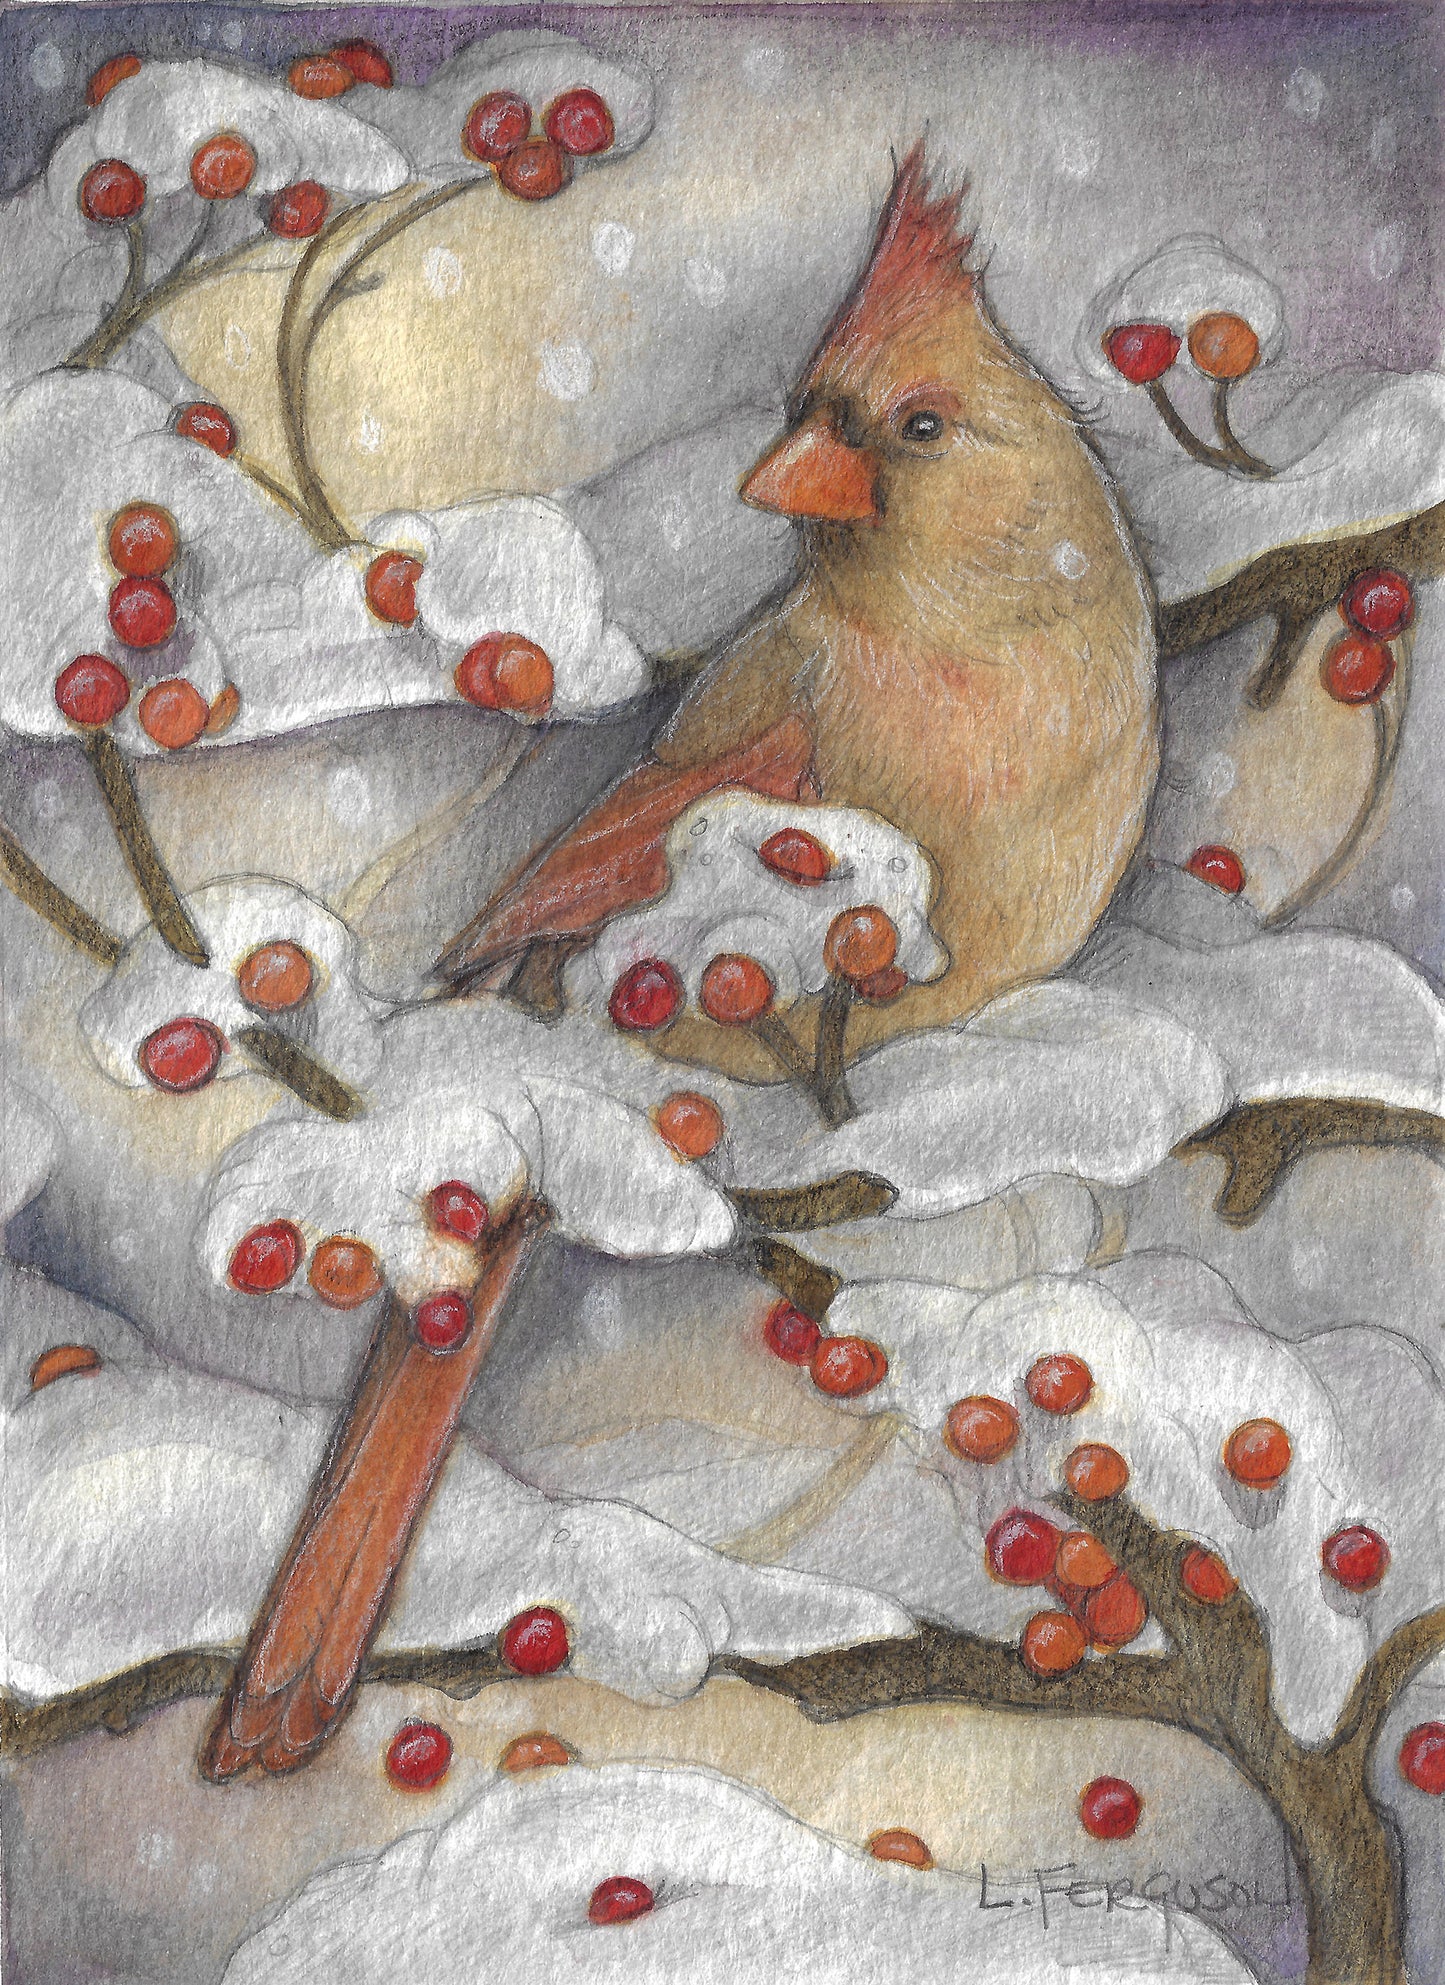 female Northern Cardinal sitting in tree with winter berries